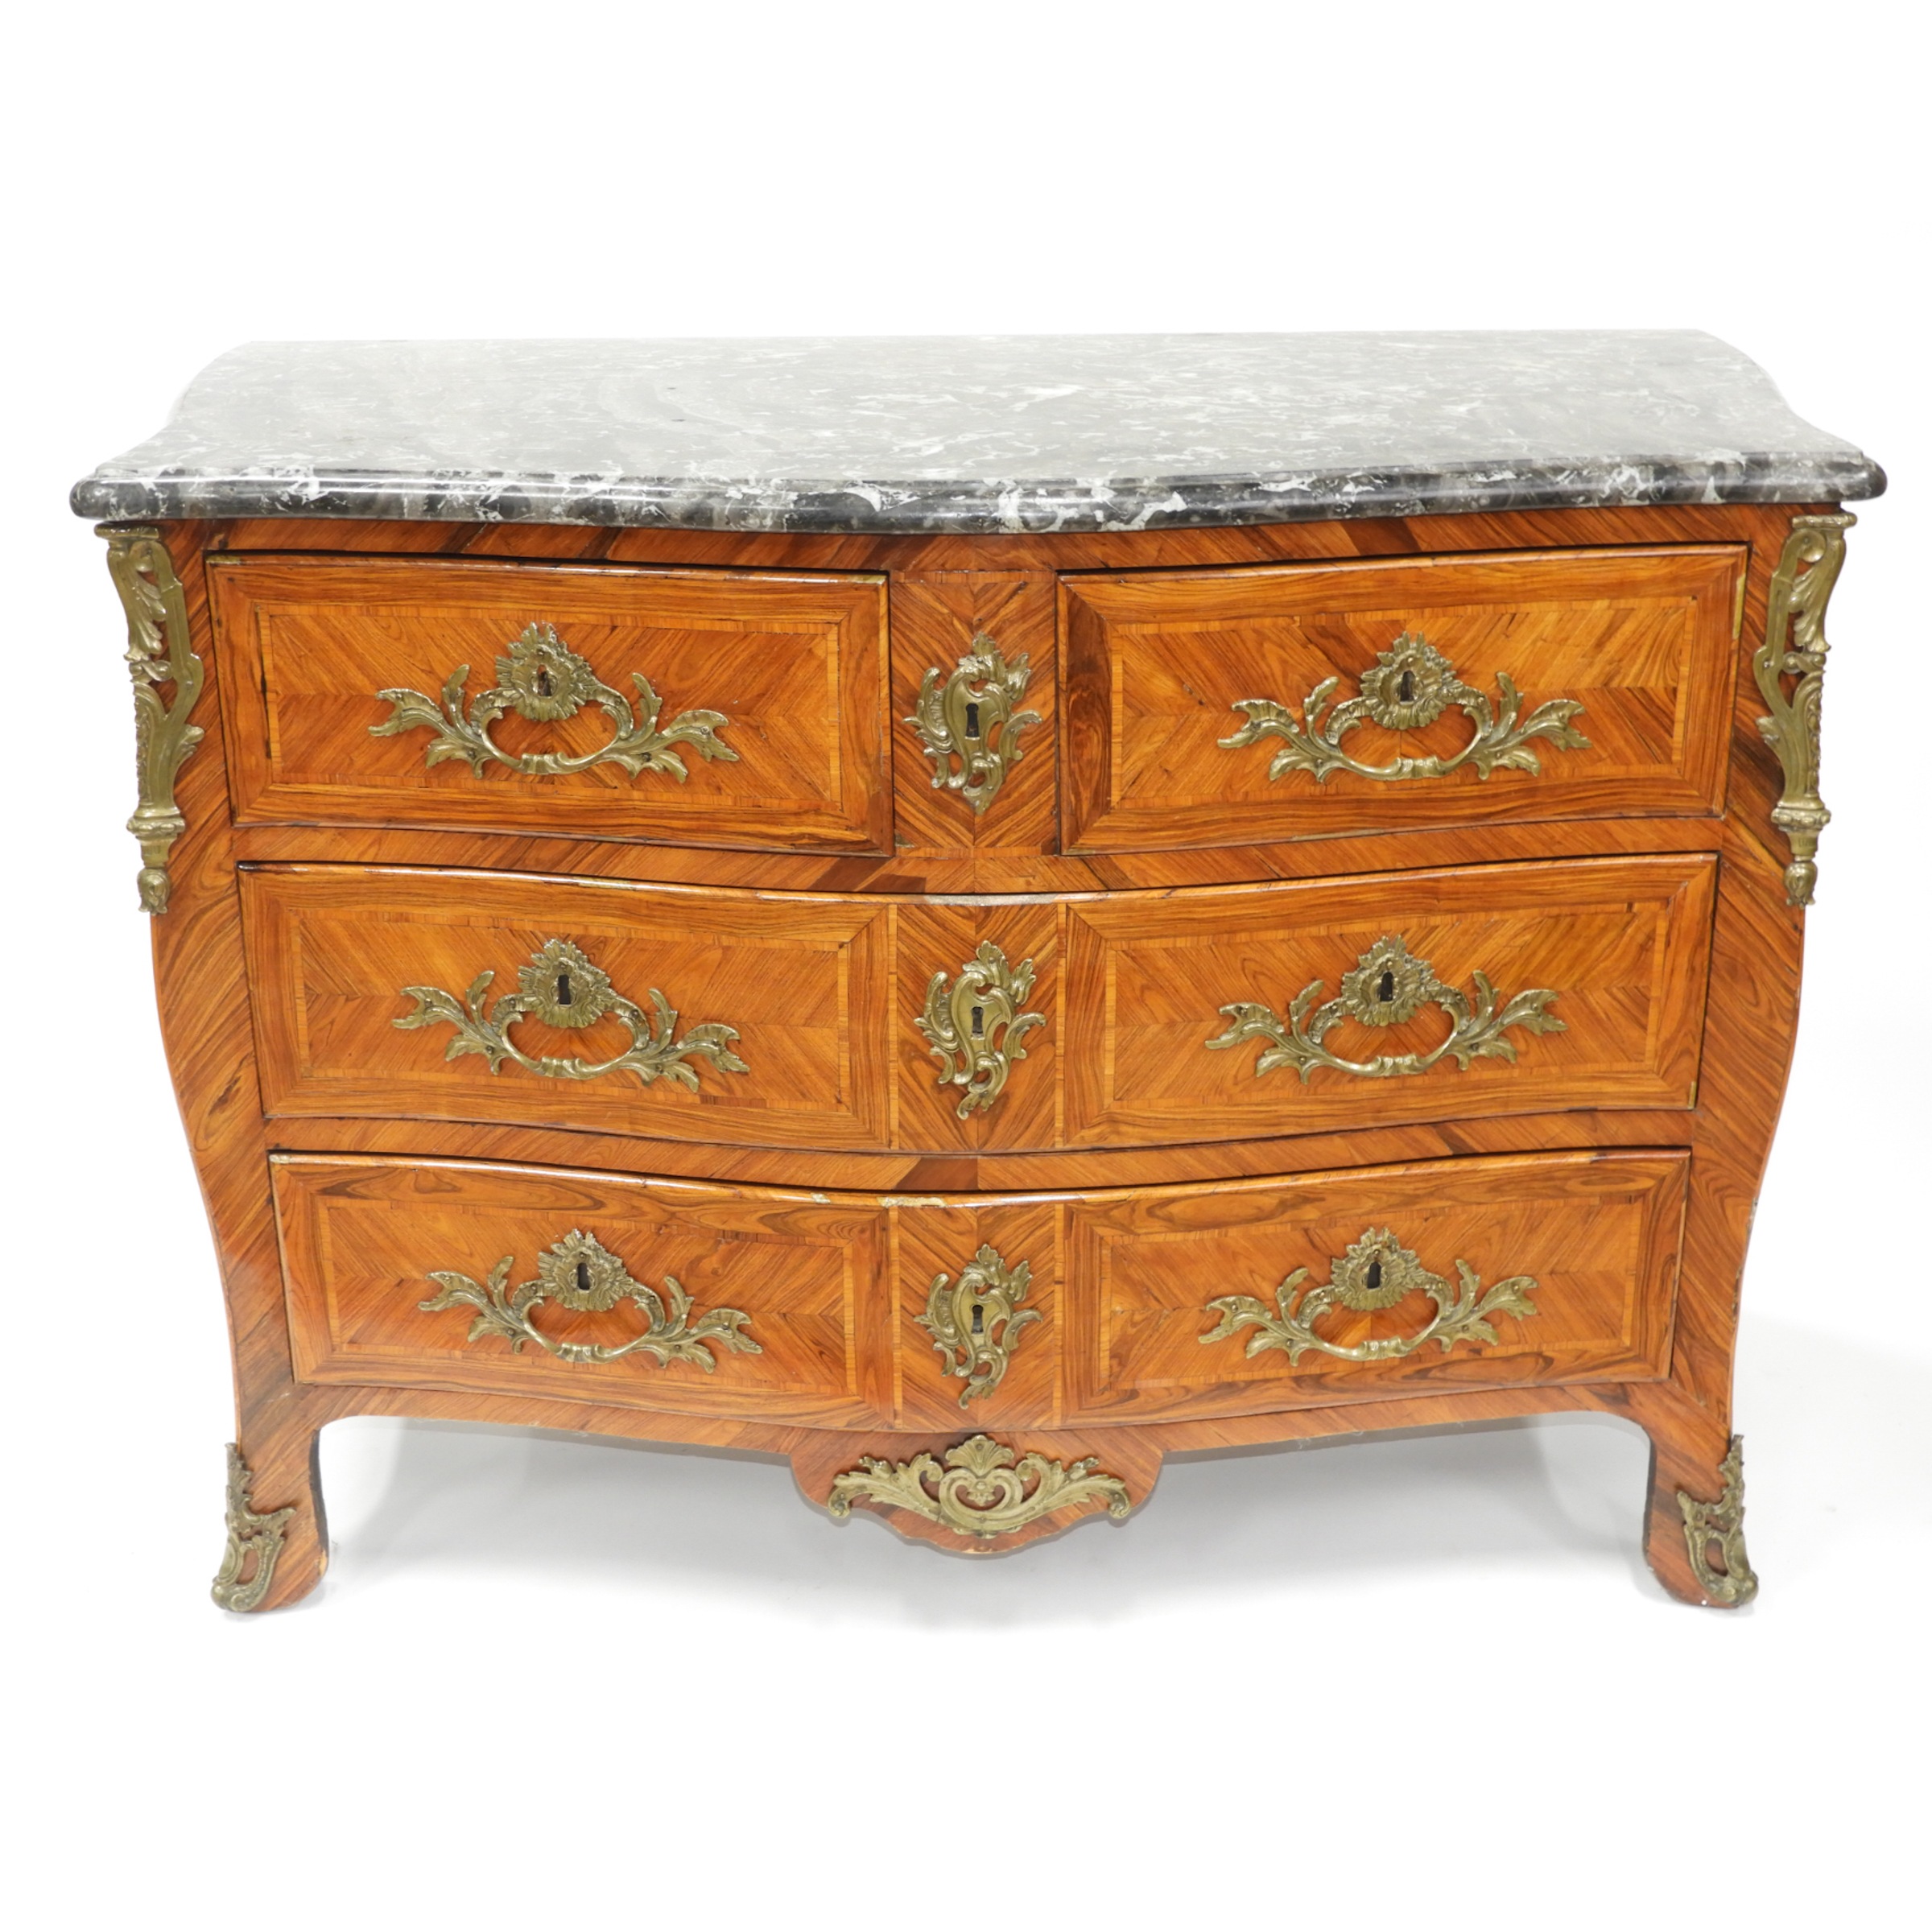 French Ormolu Mounted Rosewood Parquetry Inlaid Serpentine Front Commode, early 19th century